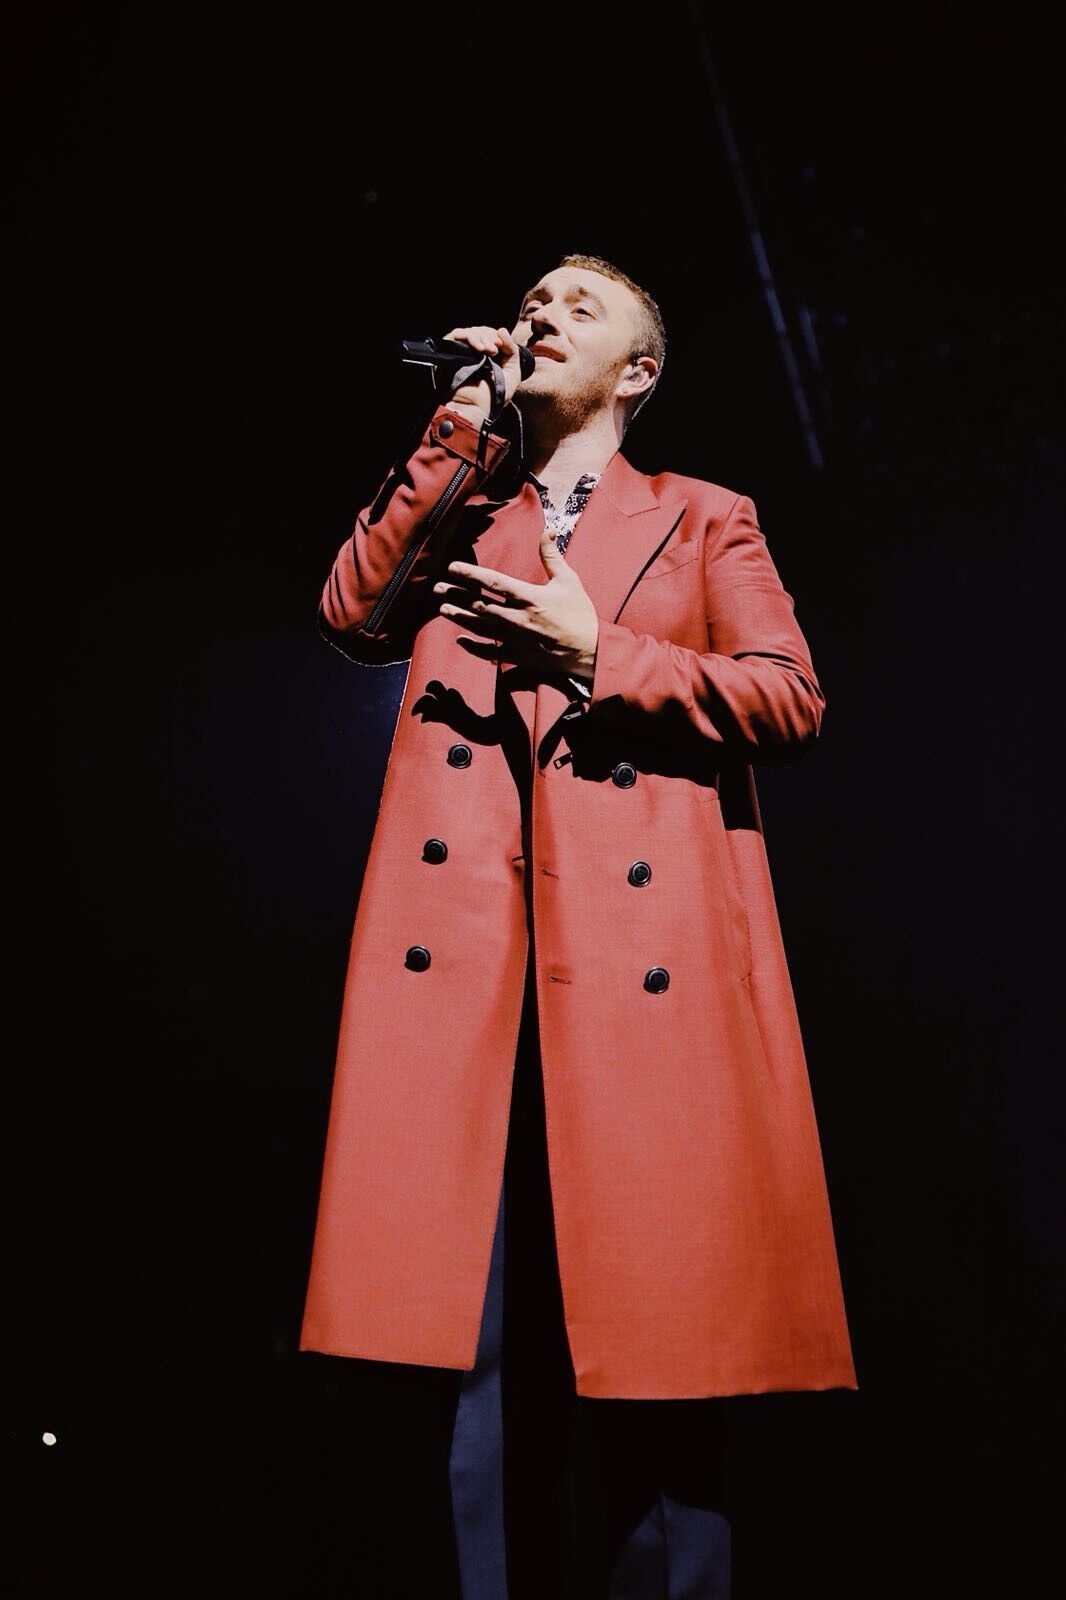 Sam Smith in Givenchy - The Thrill of It All North American Tour